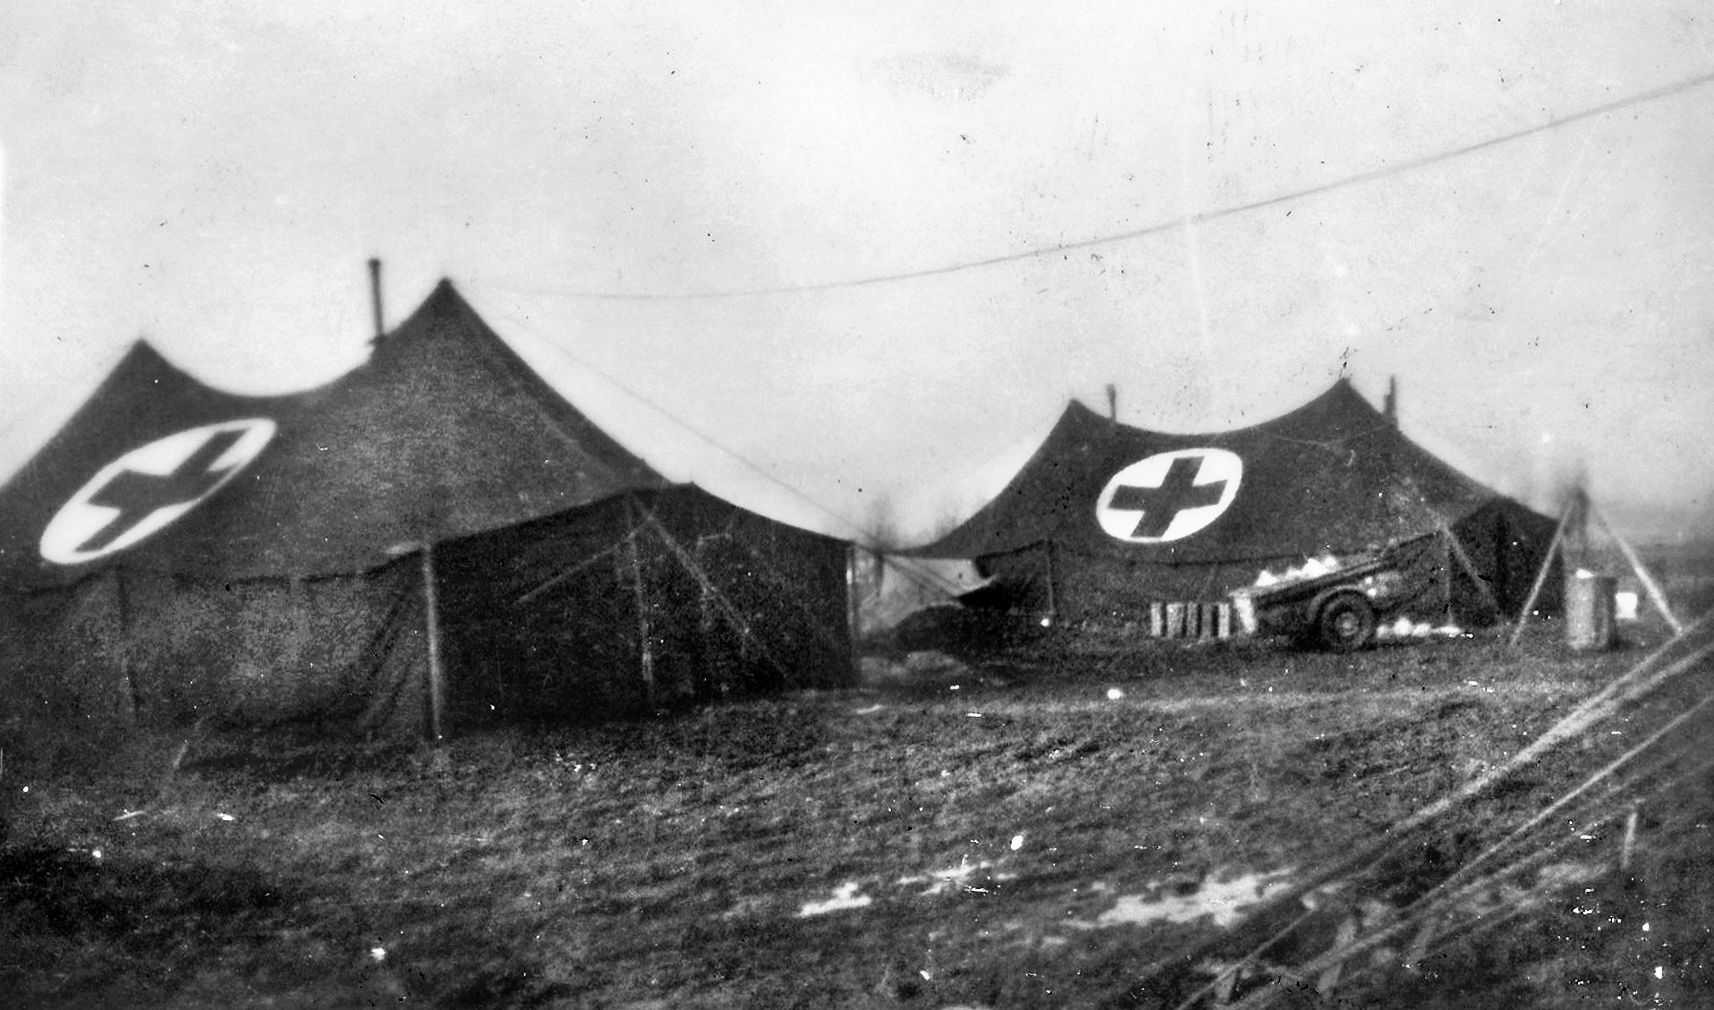 This photo reportedly shows the damage inflicted during the attack on the 326th Airborne Medical Company by Kampfgruppe Stephan during the Battle of the Bulge.